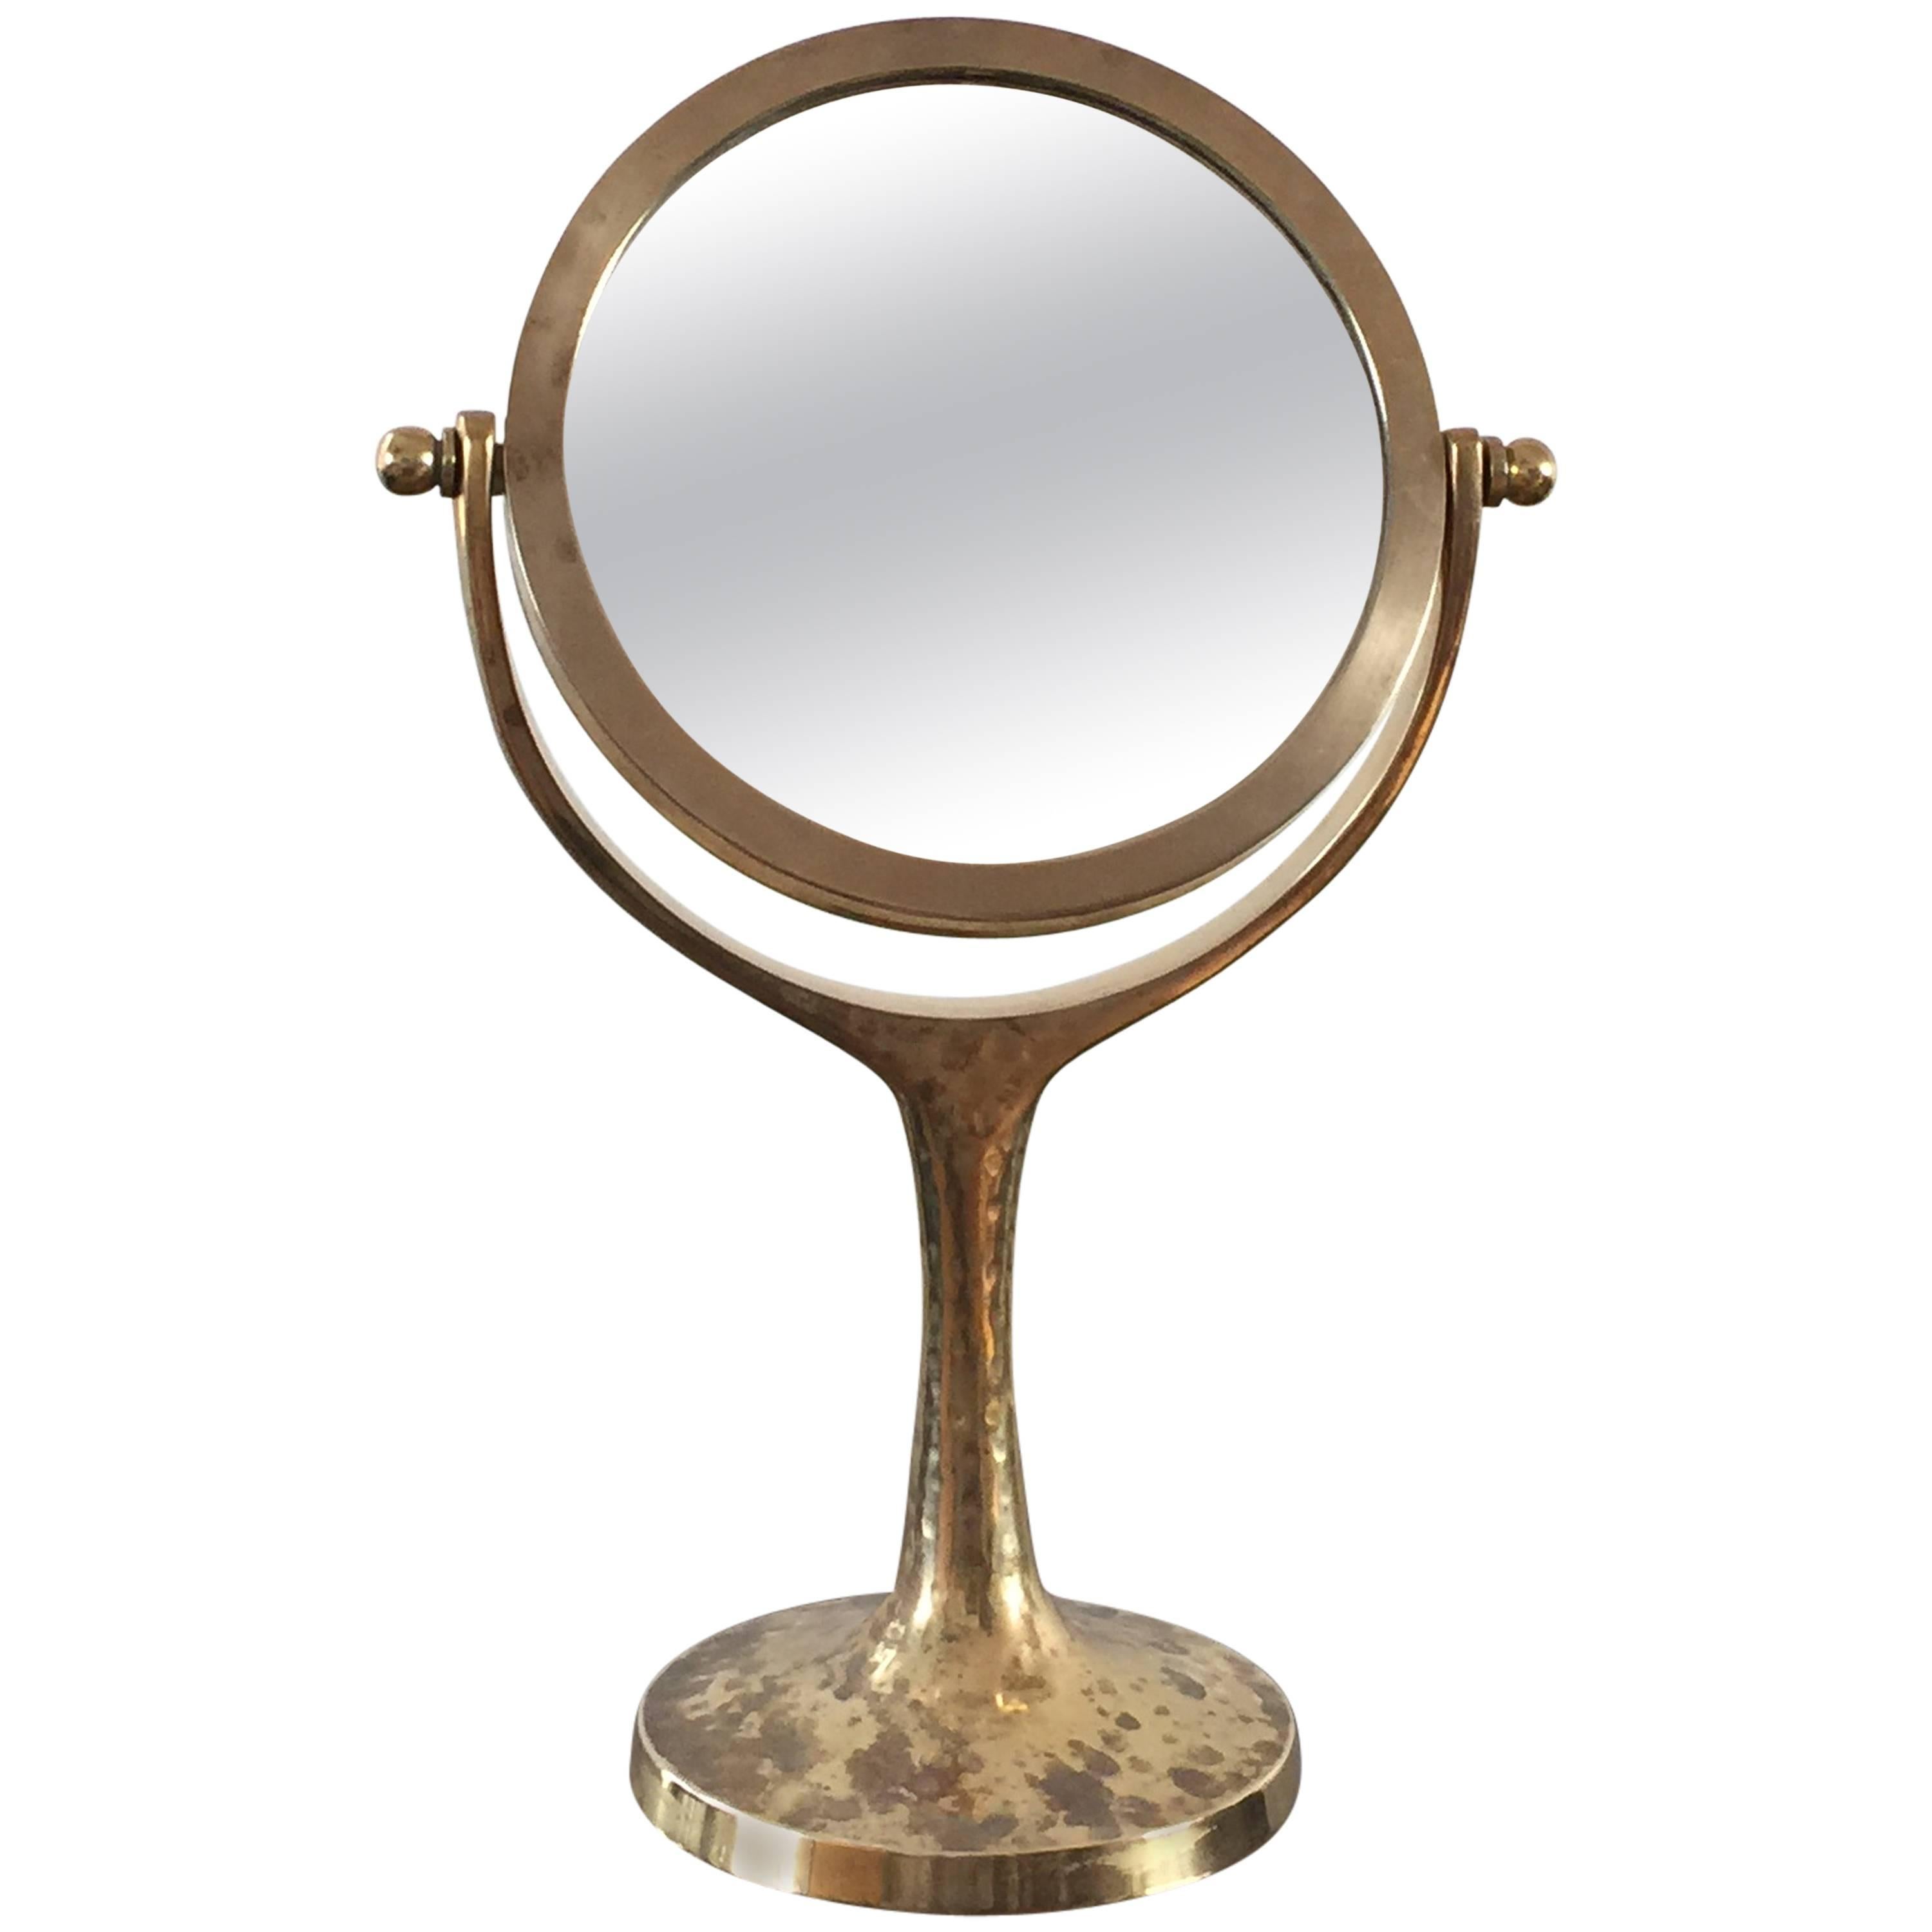 Exceptional Petite Vanity "psyché" Mirror in Brass, France, 1960s For Sale